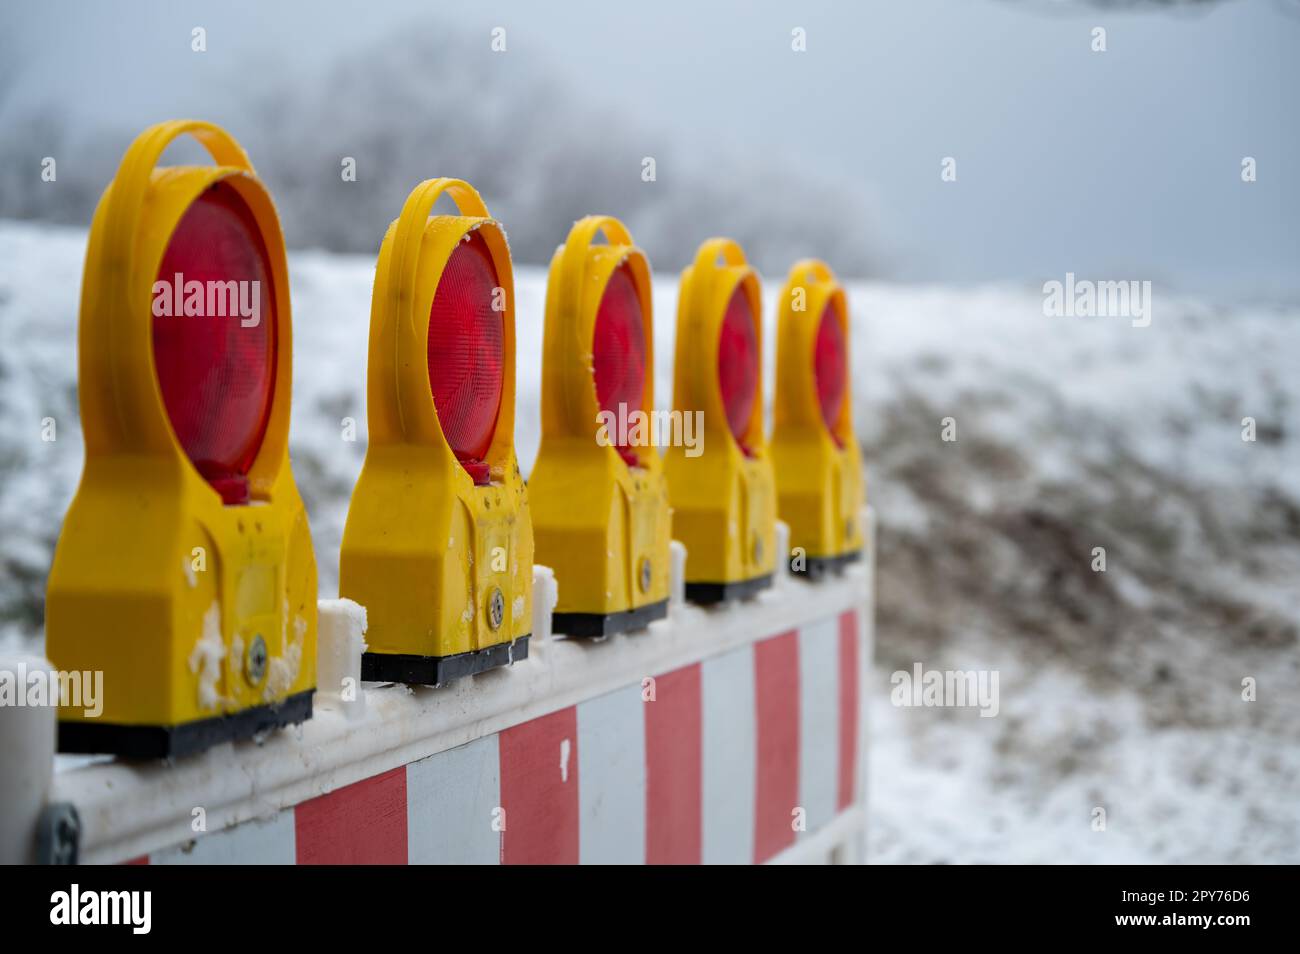 Closed because of snow, fence do not pass. barricade Stock Photo